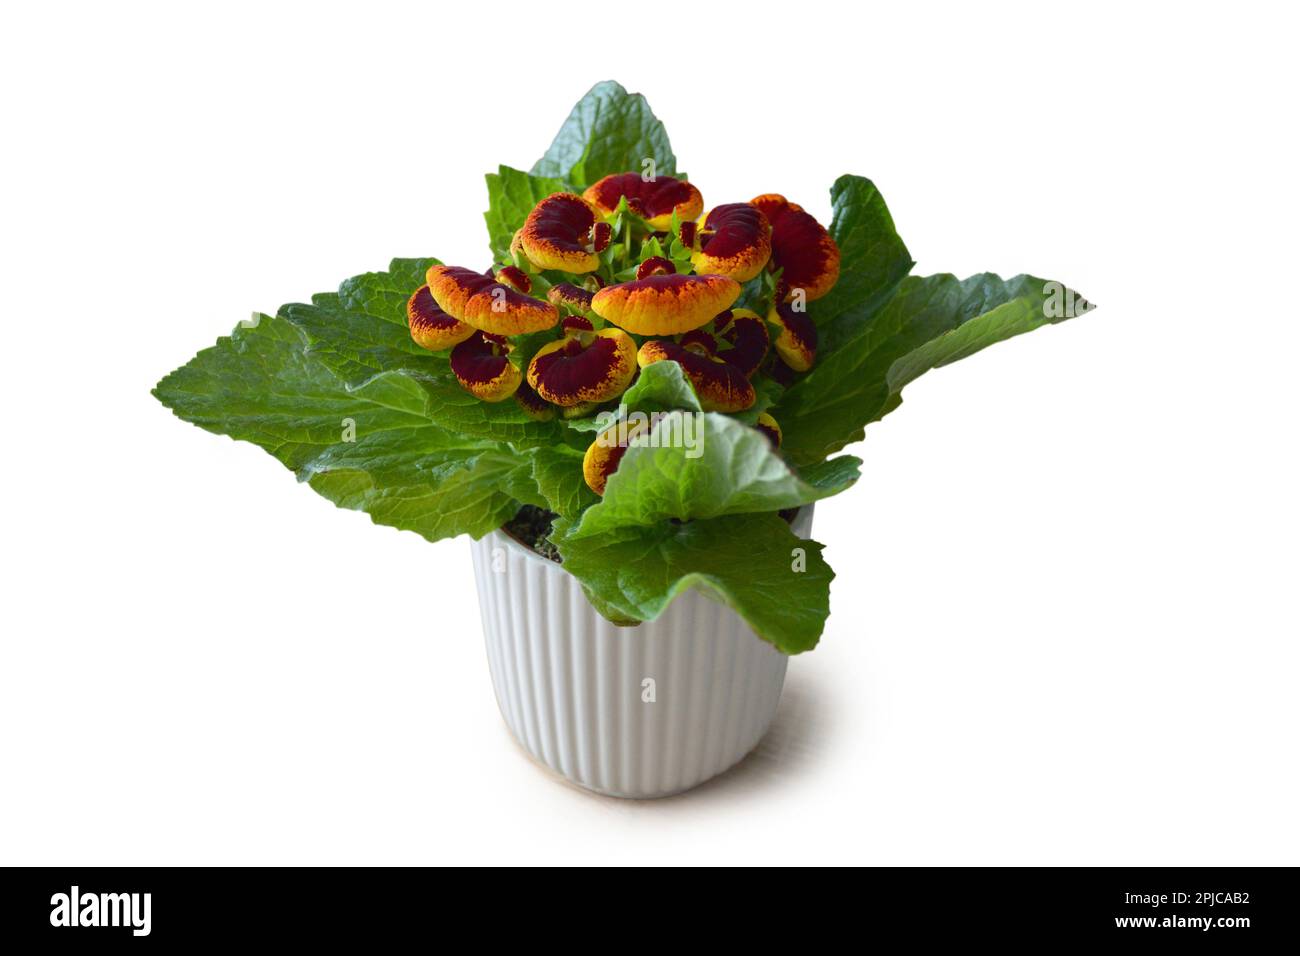 Potted Calceolaria plant isolated on white background Stock Photo